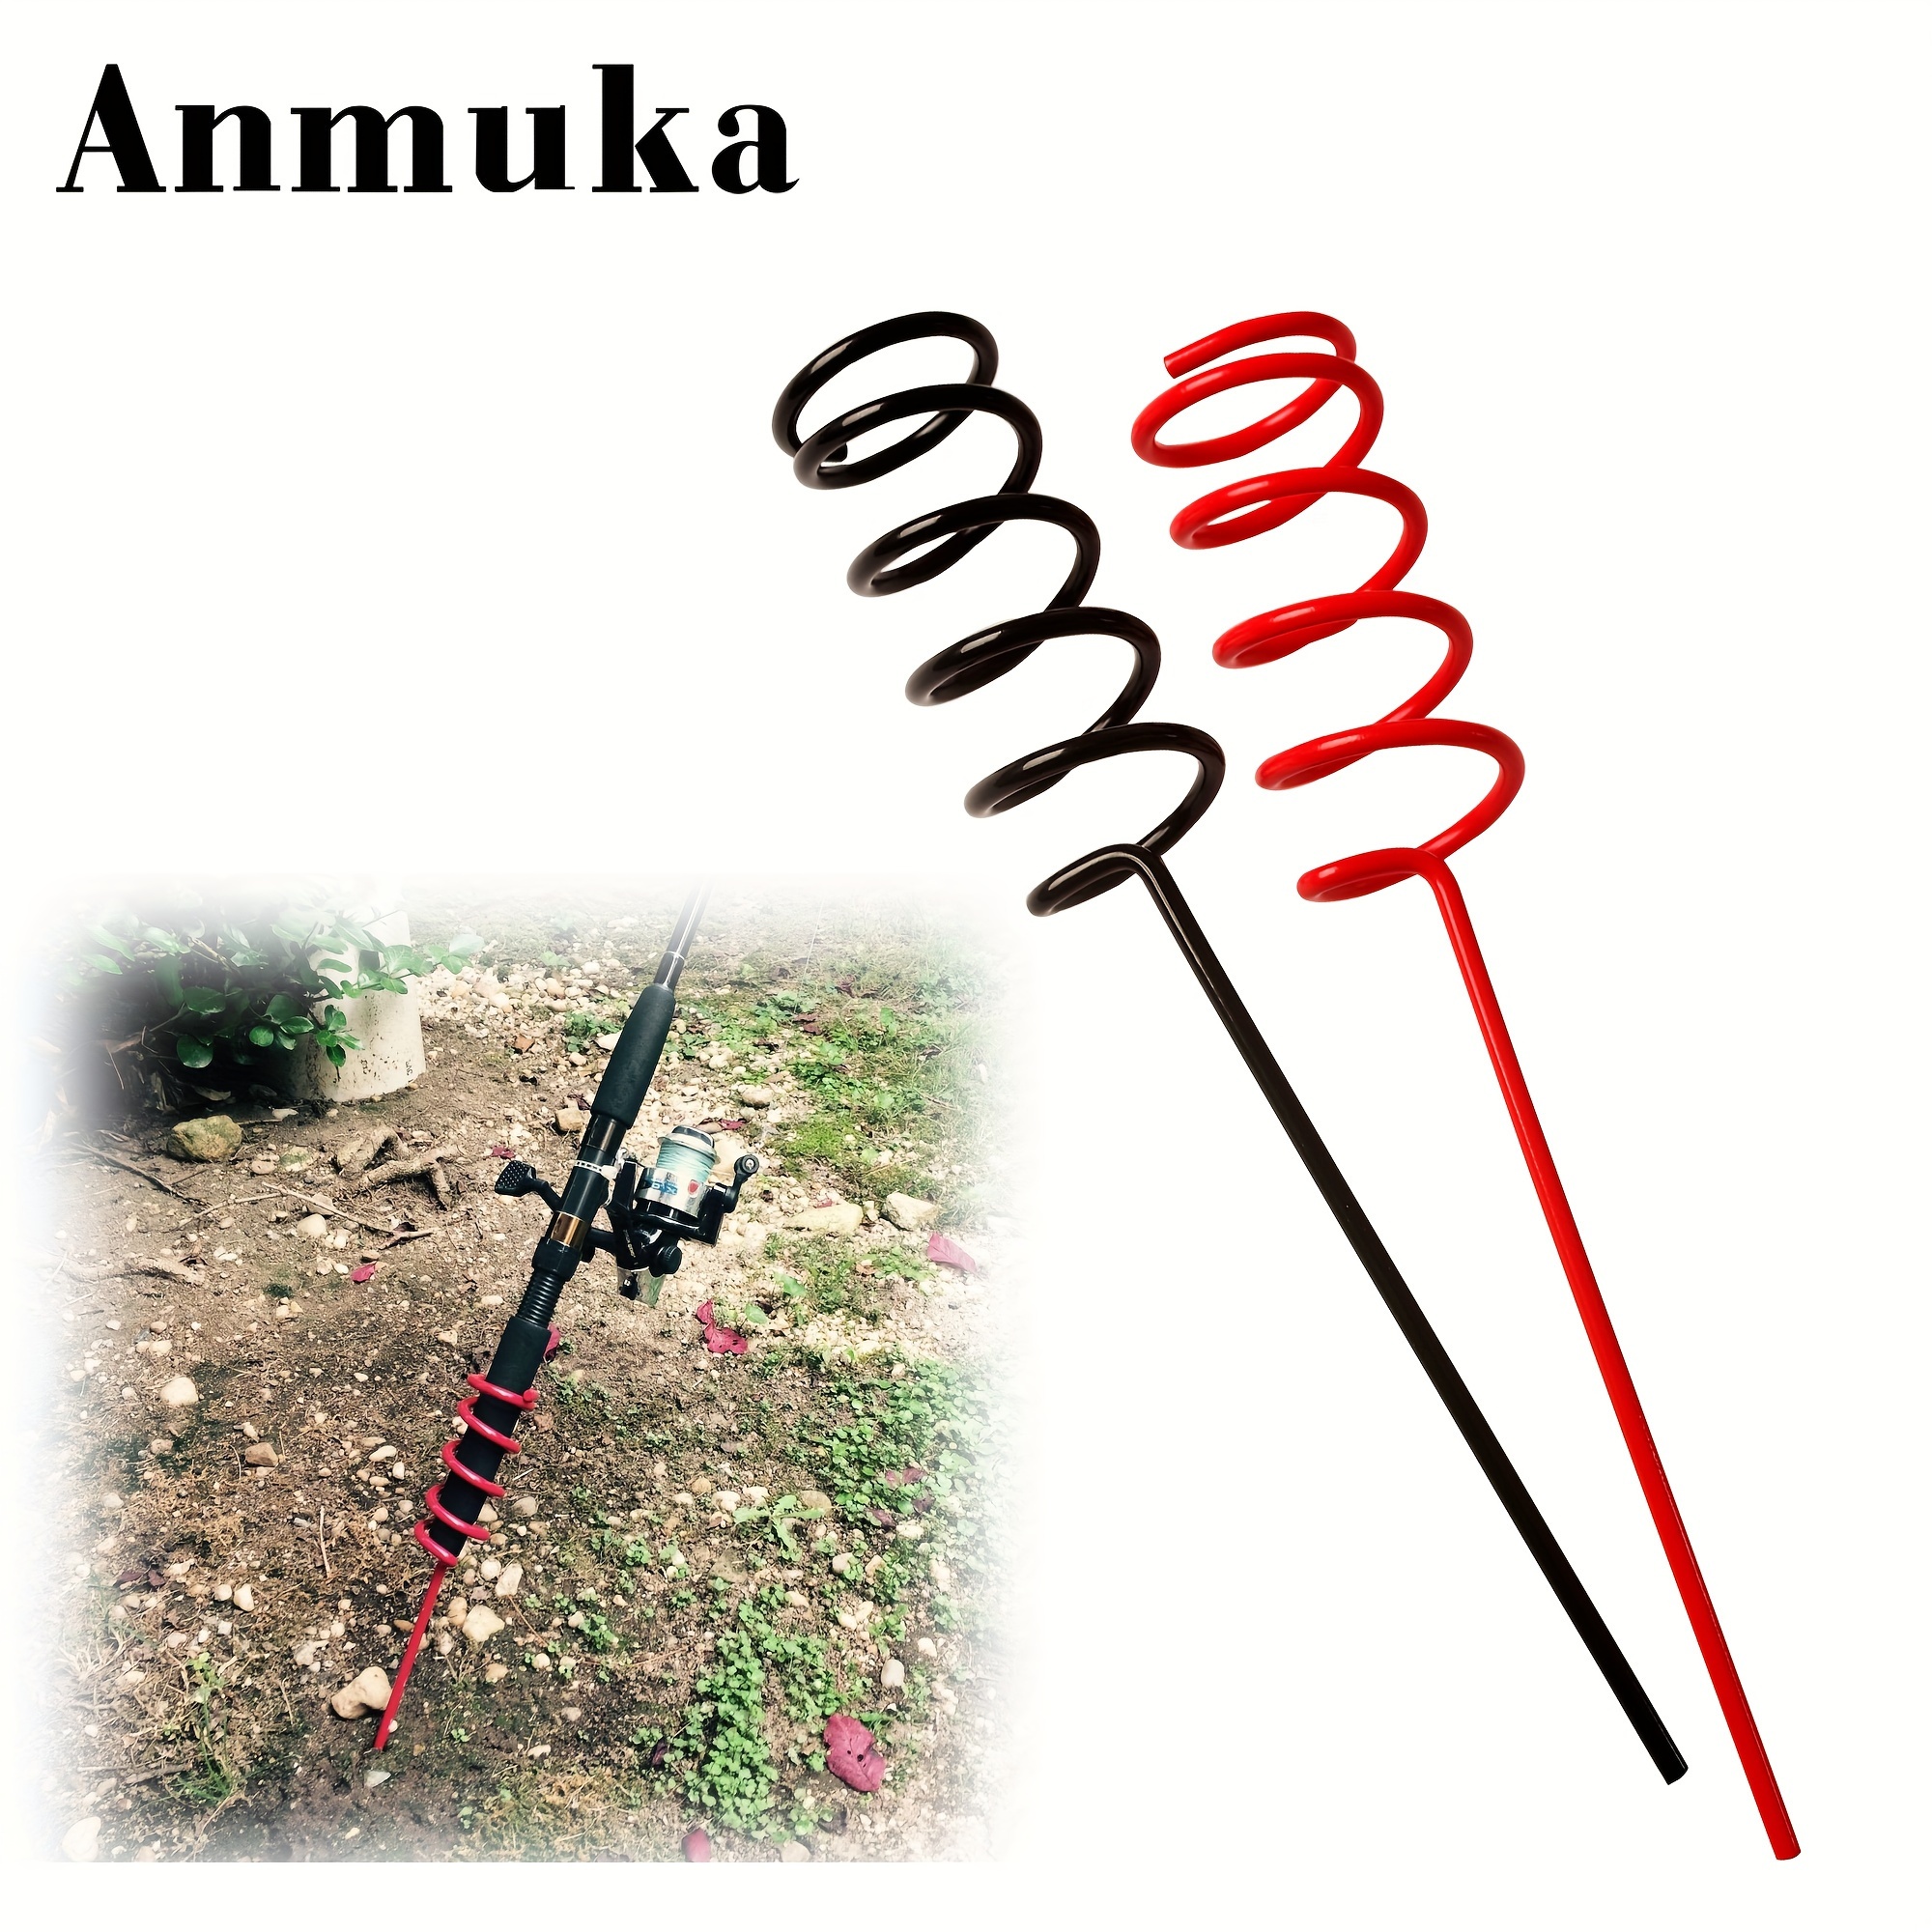 

Anmuka Spiral Fishing Rod Holder - Stainless Steel Ground Support Stand, Reinforced Thickening, Rust-resistant Metal, Universal Fit For Most Fishing Poles, Valentine's Day Fishing Accessory